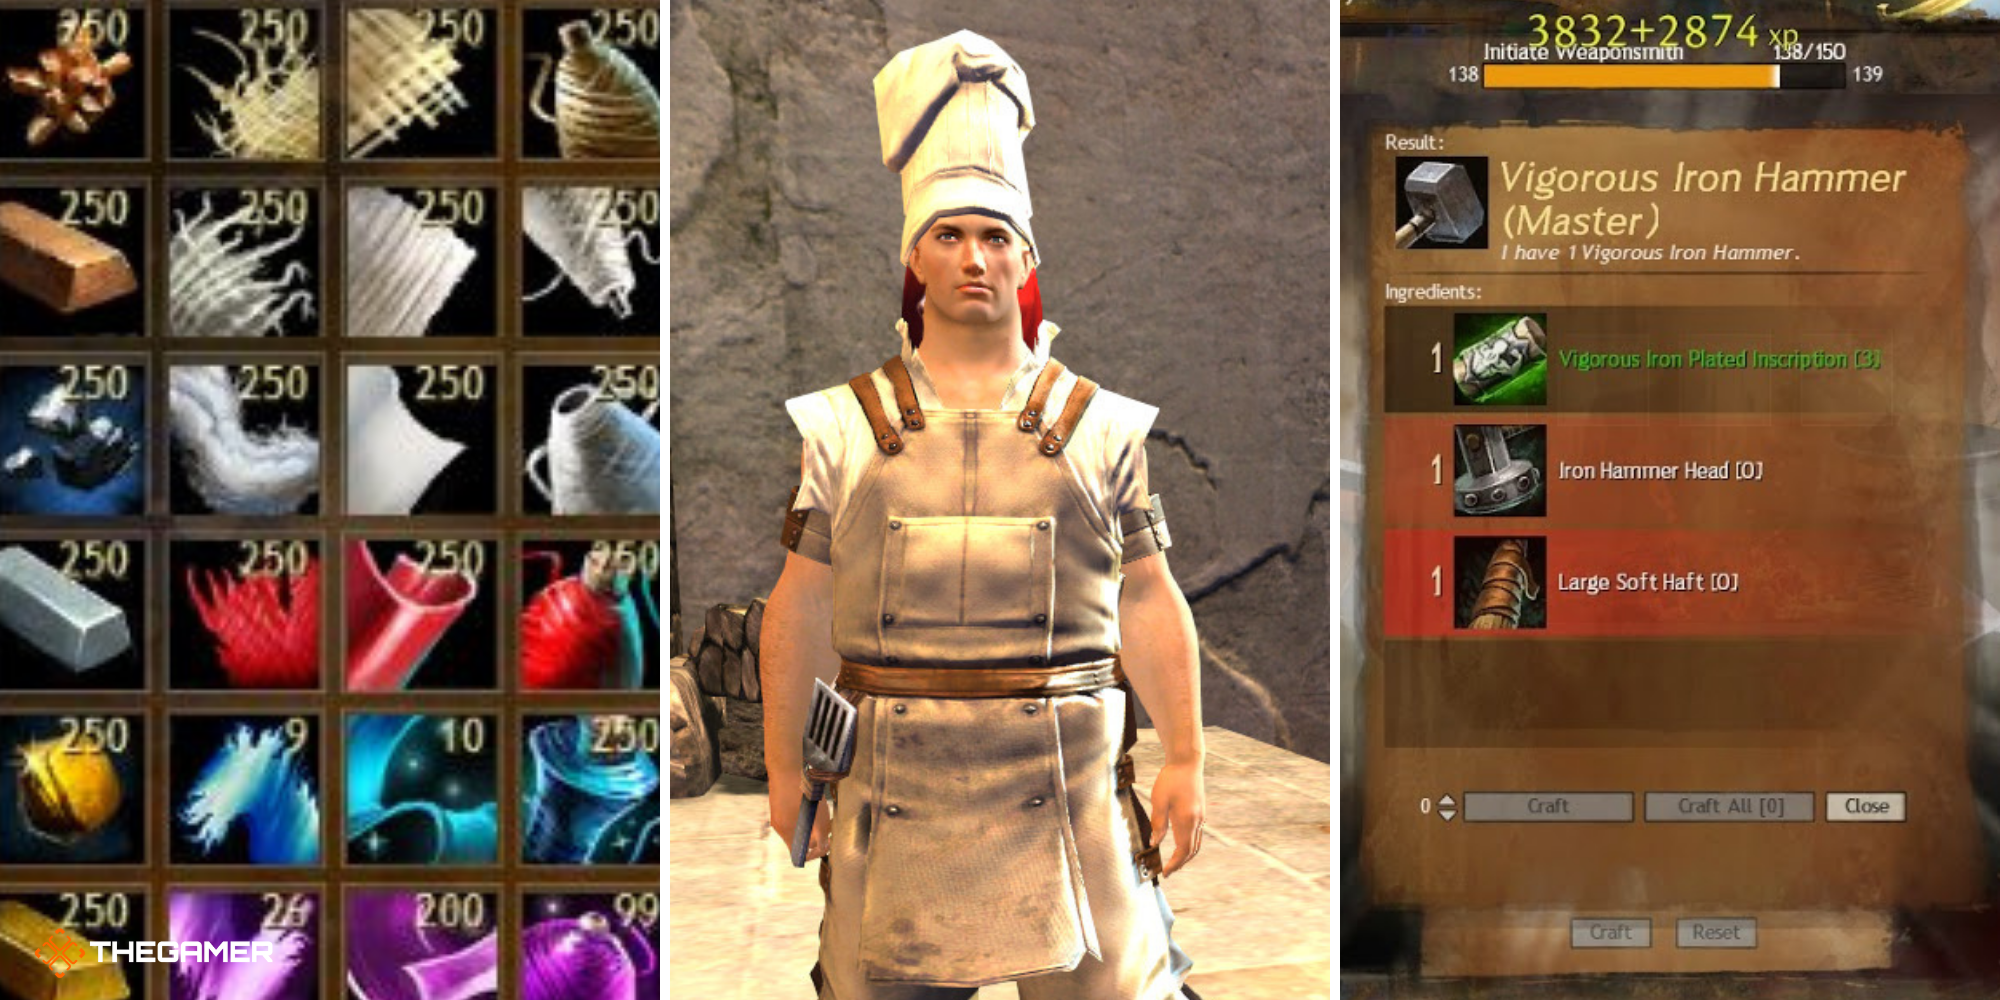 Ascended crafting - marks or from scratch? - Guild Wars 2 Discussion -  Guild Wars 2 Forums